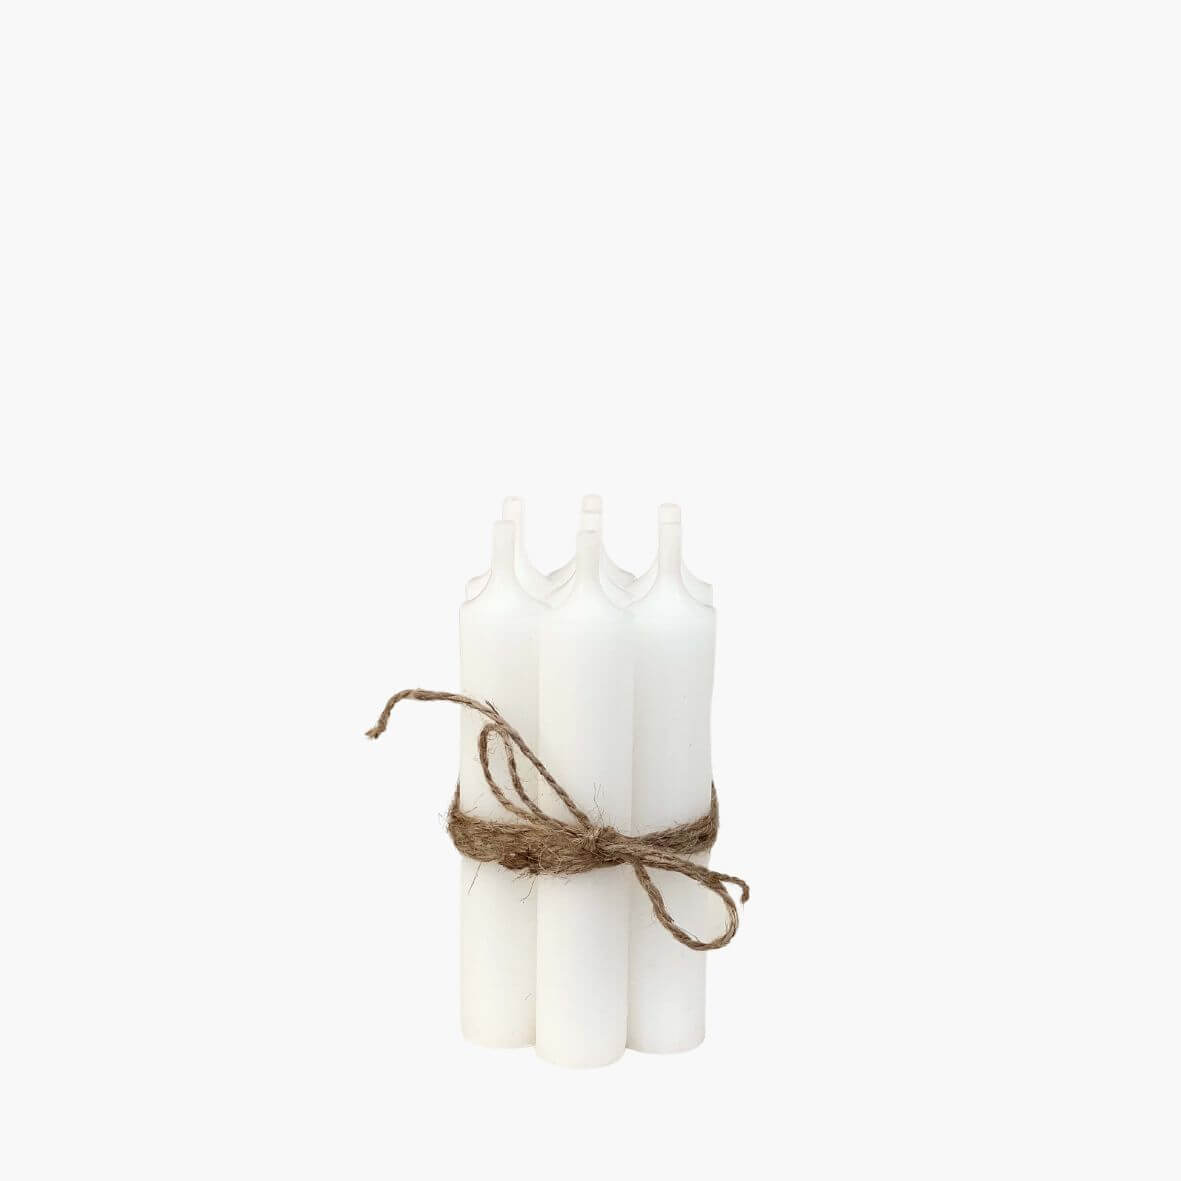 Bunch of 7 short dinner candles wrapped in jute on white background